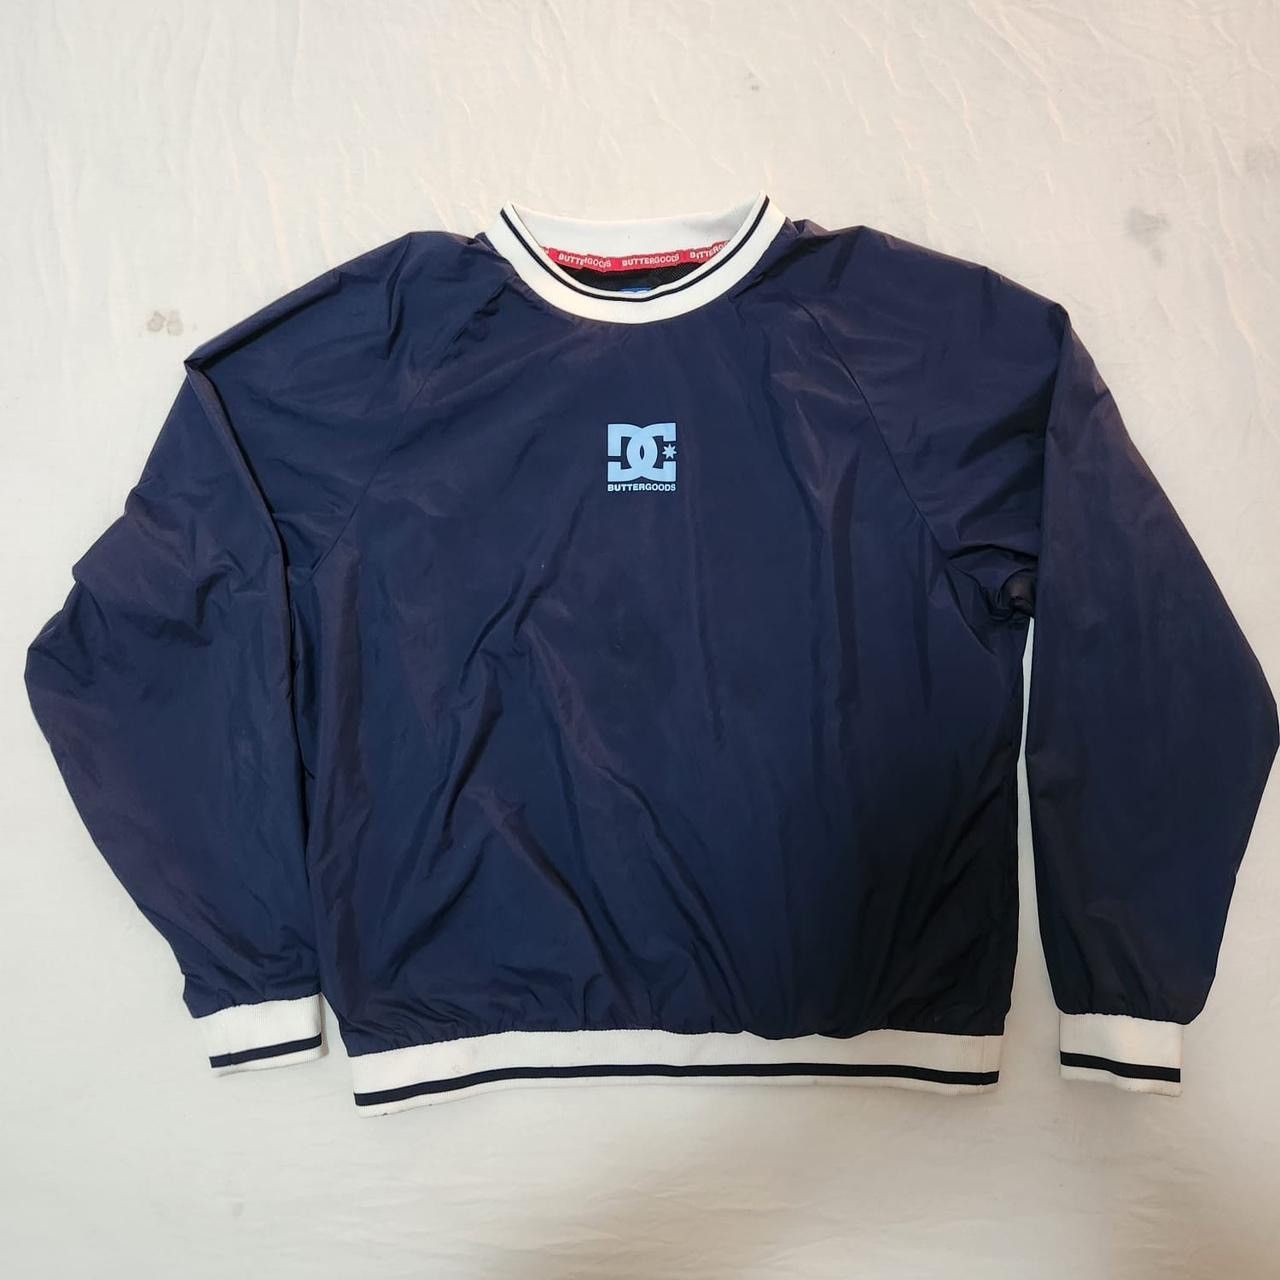 Dc DC x ButterGoods pull-over | Grailed